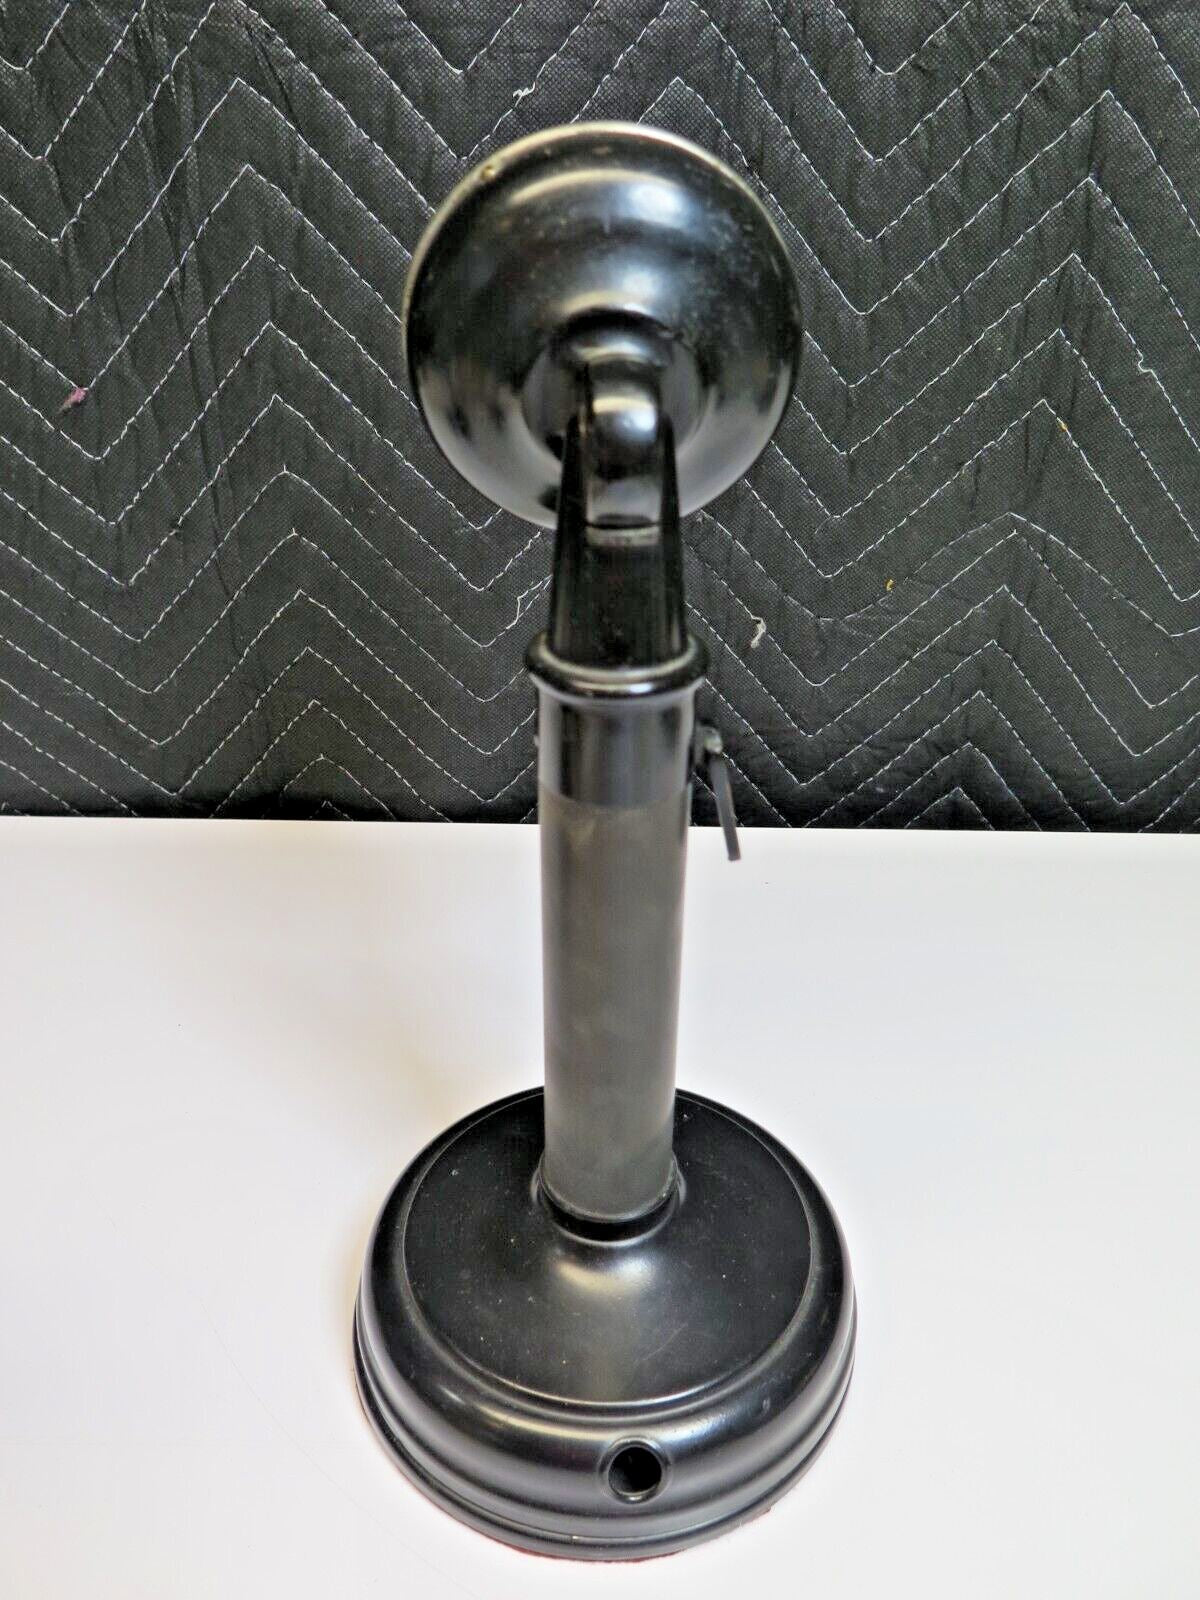 Vintage Kellogg T-32 Press to Talk Candlestick Microphone US Army Military 1940s